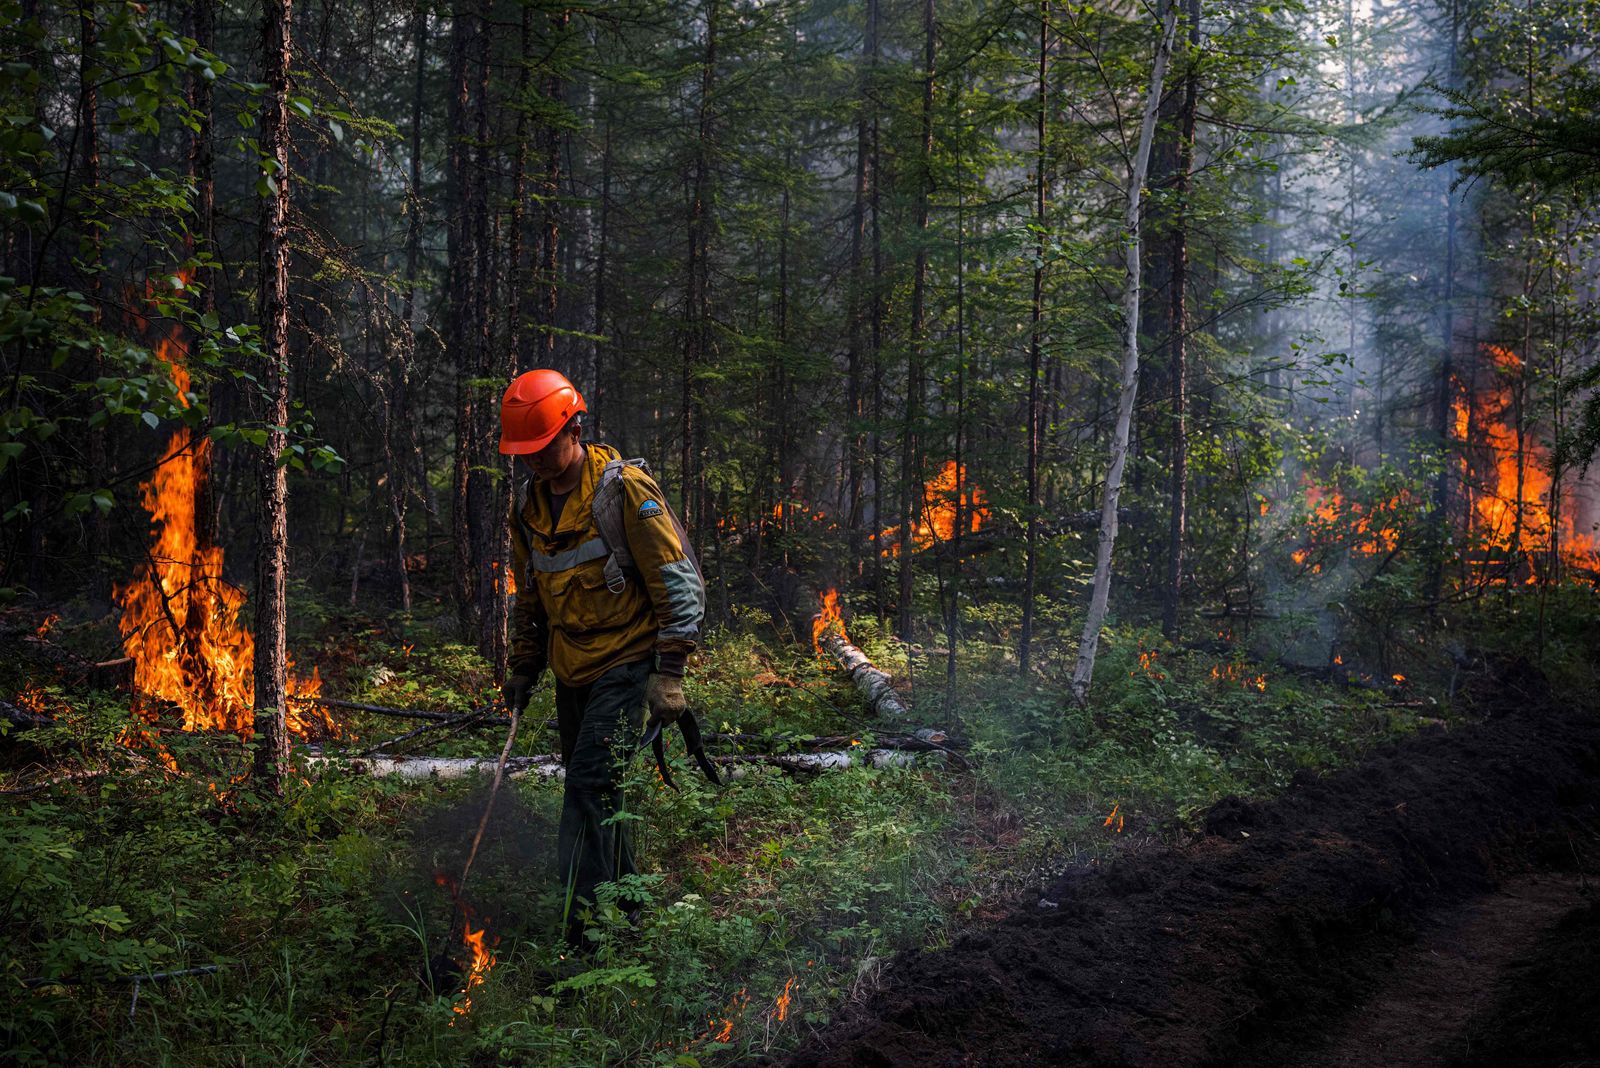 A member of Aerial Forest Protection Service brigade sets a backfire to stop a forest fire from spreading at the edge of the village of Byas-Kyuel, on July 26, 2021. - Fuelled by a June heatwave, wildfires have swept through more than 1.5 million hectares of Yakutia's swampy coniferous taiga with more than a month still to go in Siberia's annual fire season. It is the third straight year that Russia's coldest region -- with a border on the Arctic ocean -- has seen wildfires so vicious that they have nearly overwhelmed its Aerial Forest Protection Service. (Photo by Dimitar DILKOFF / AFP) - AFP